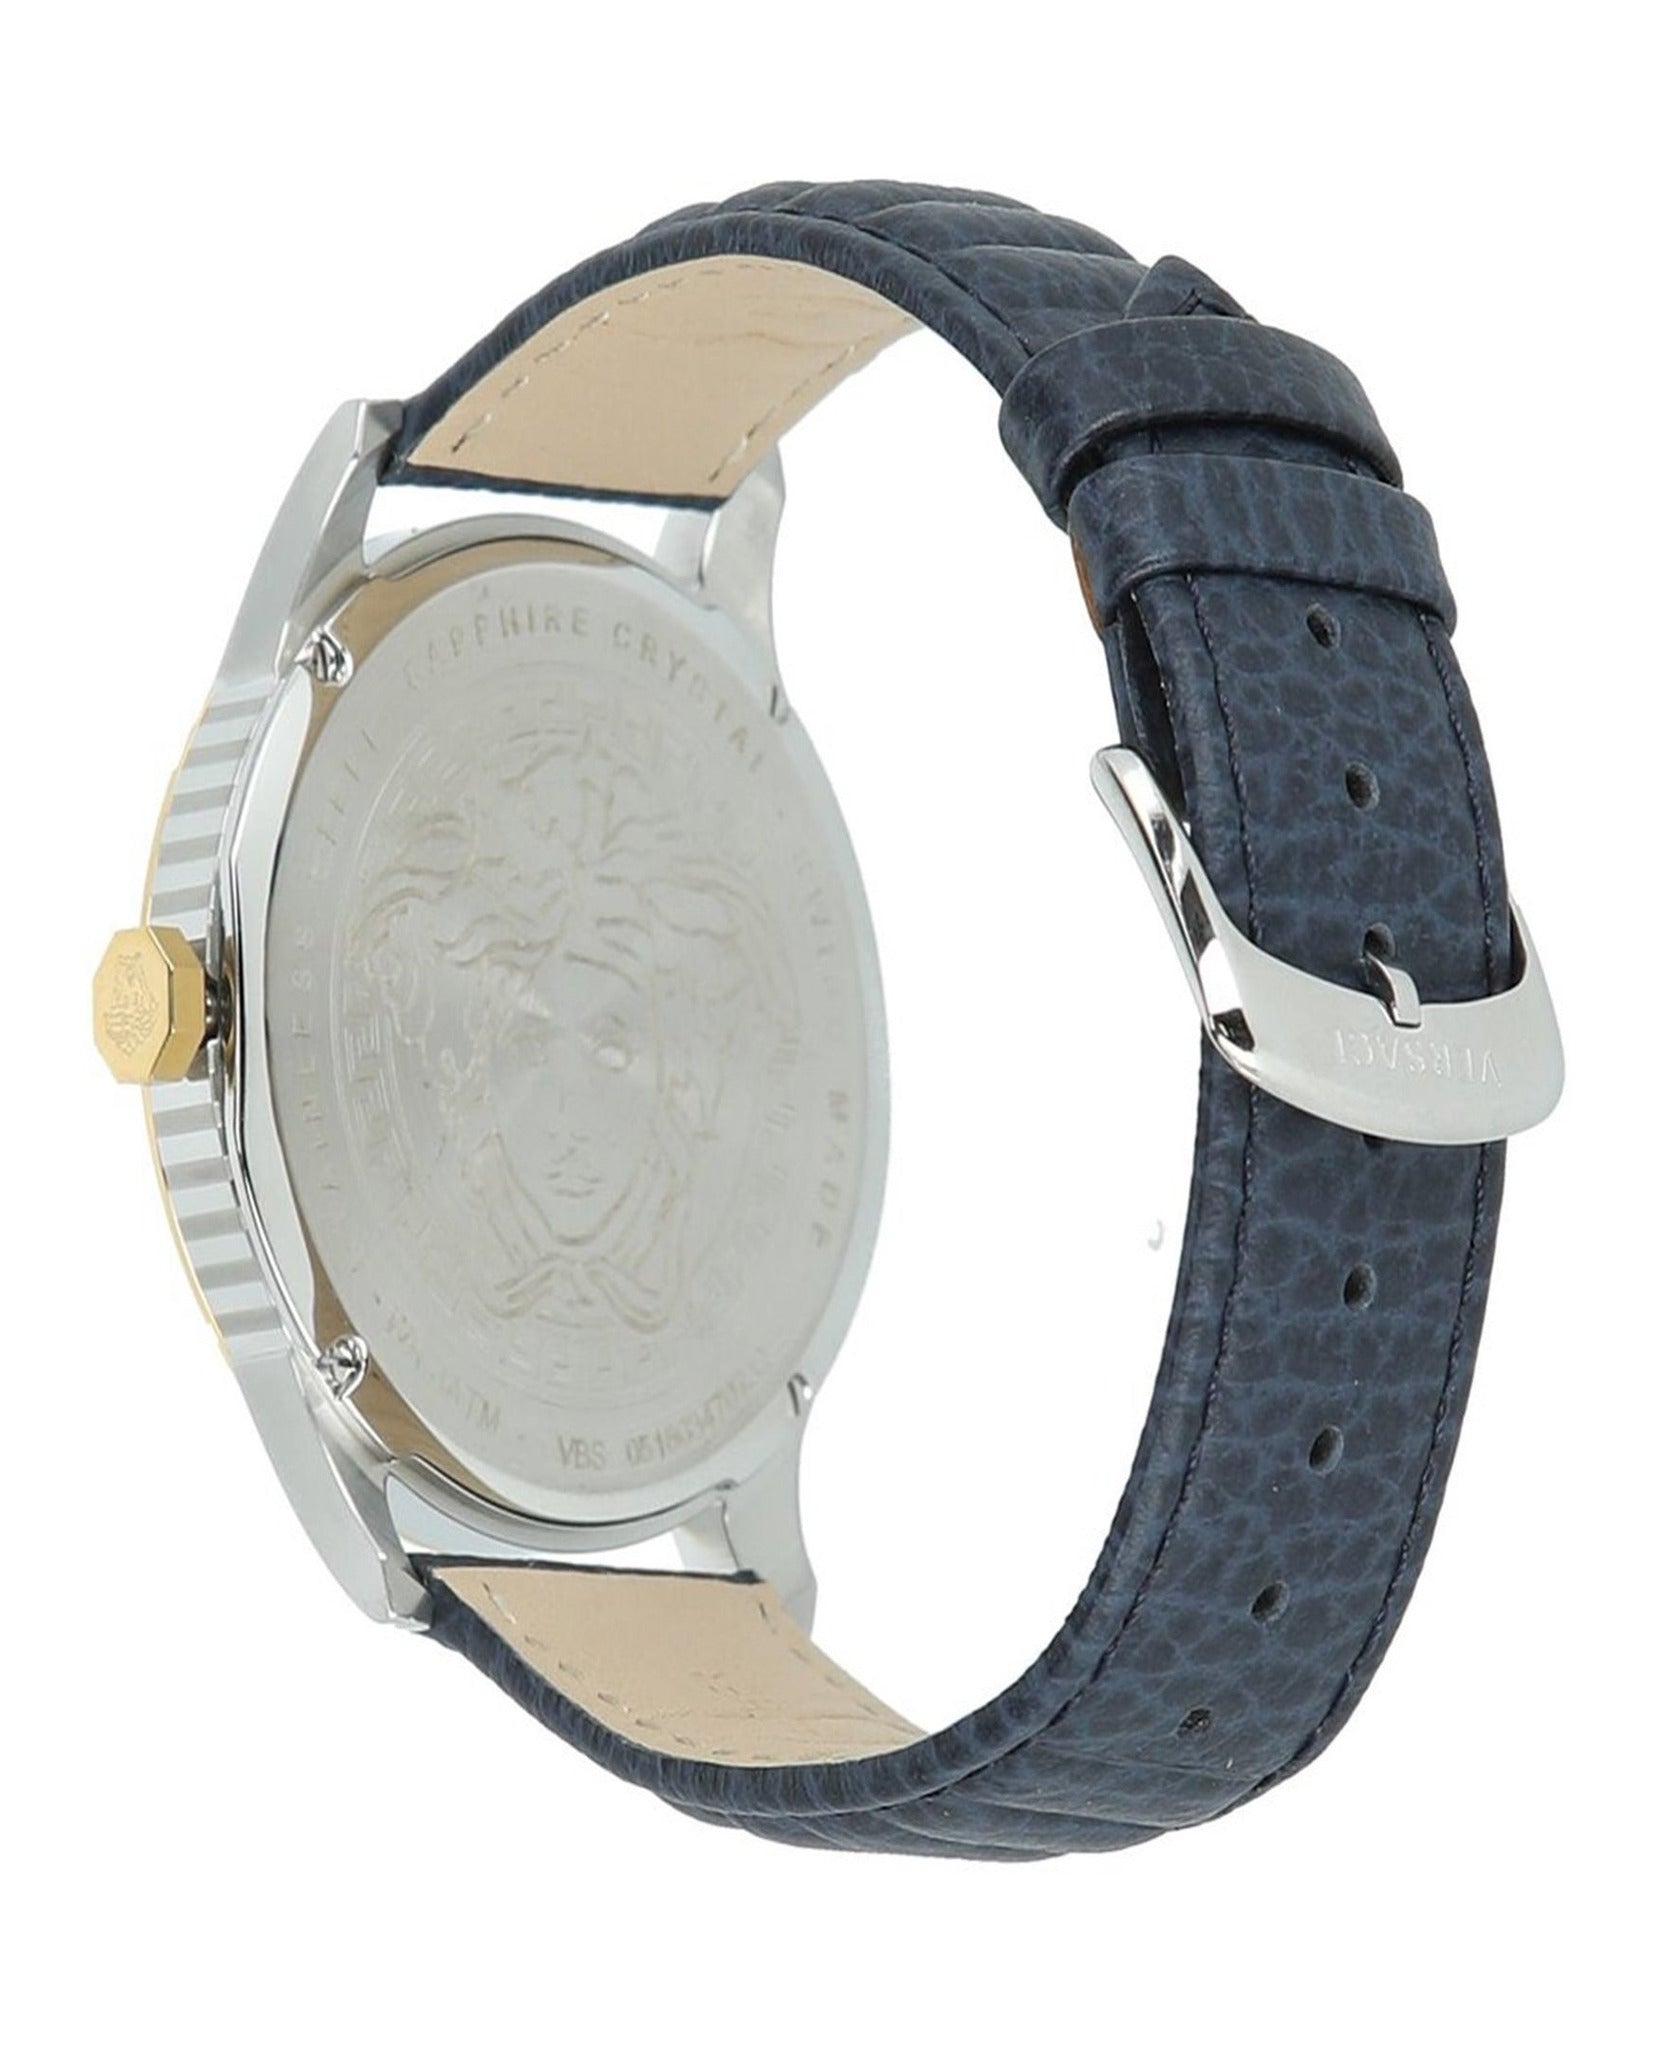 Aiakos Special Leather Watch